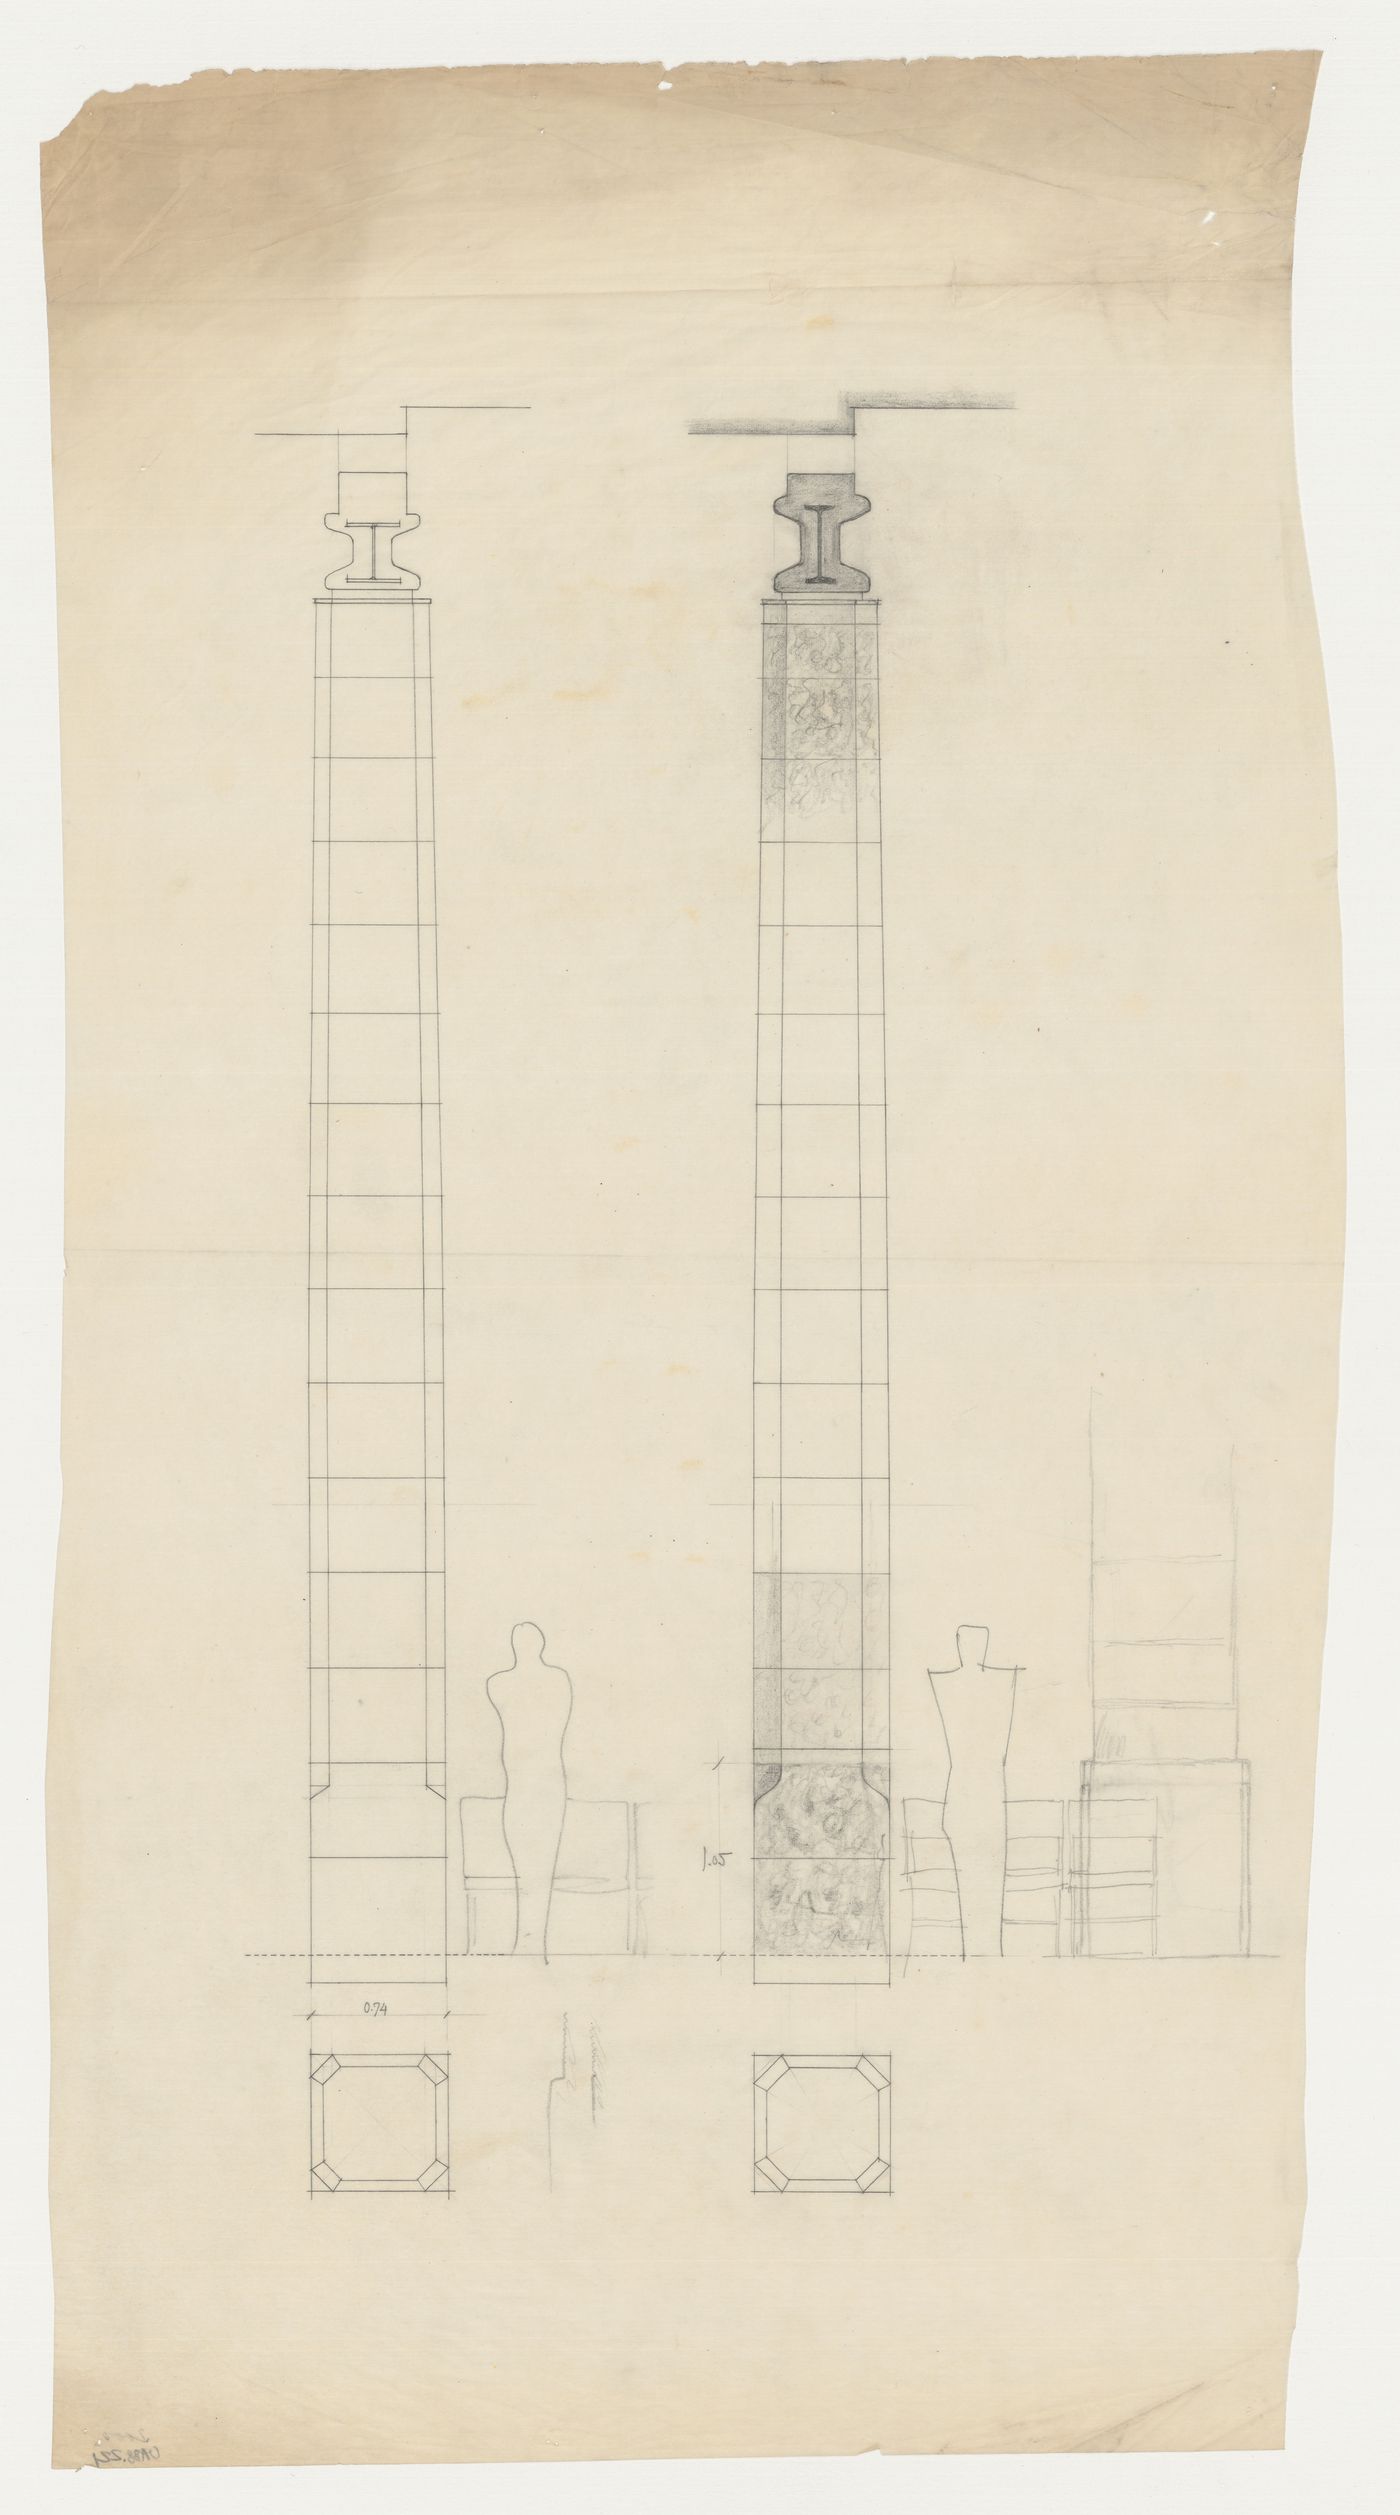 Elevations, a partial elevation and plans for columns for the Chapel of the Holy Cross, Woodland Crematorium, Woodland Cemetery, Stockholm, Sweden